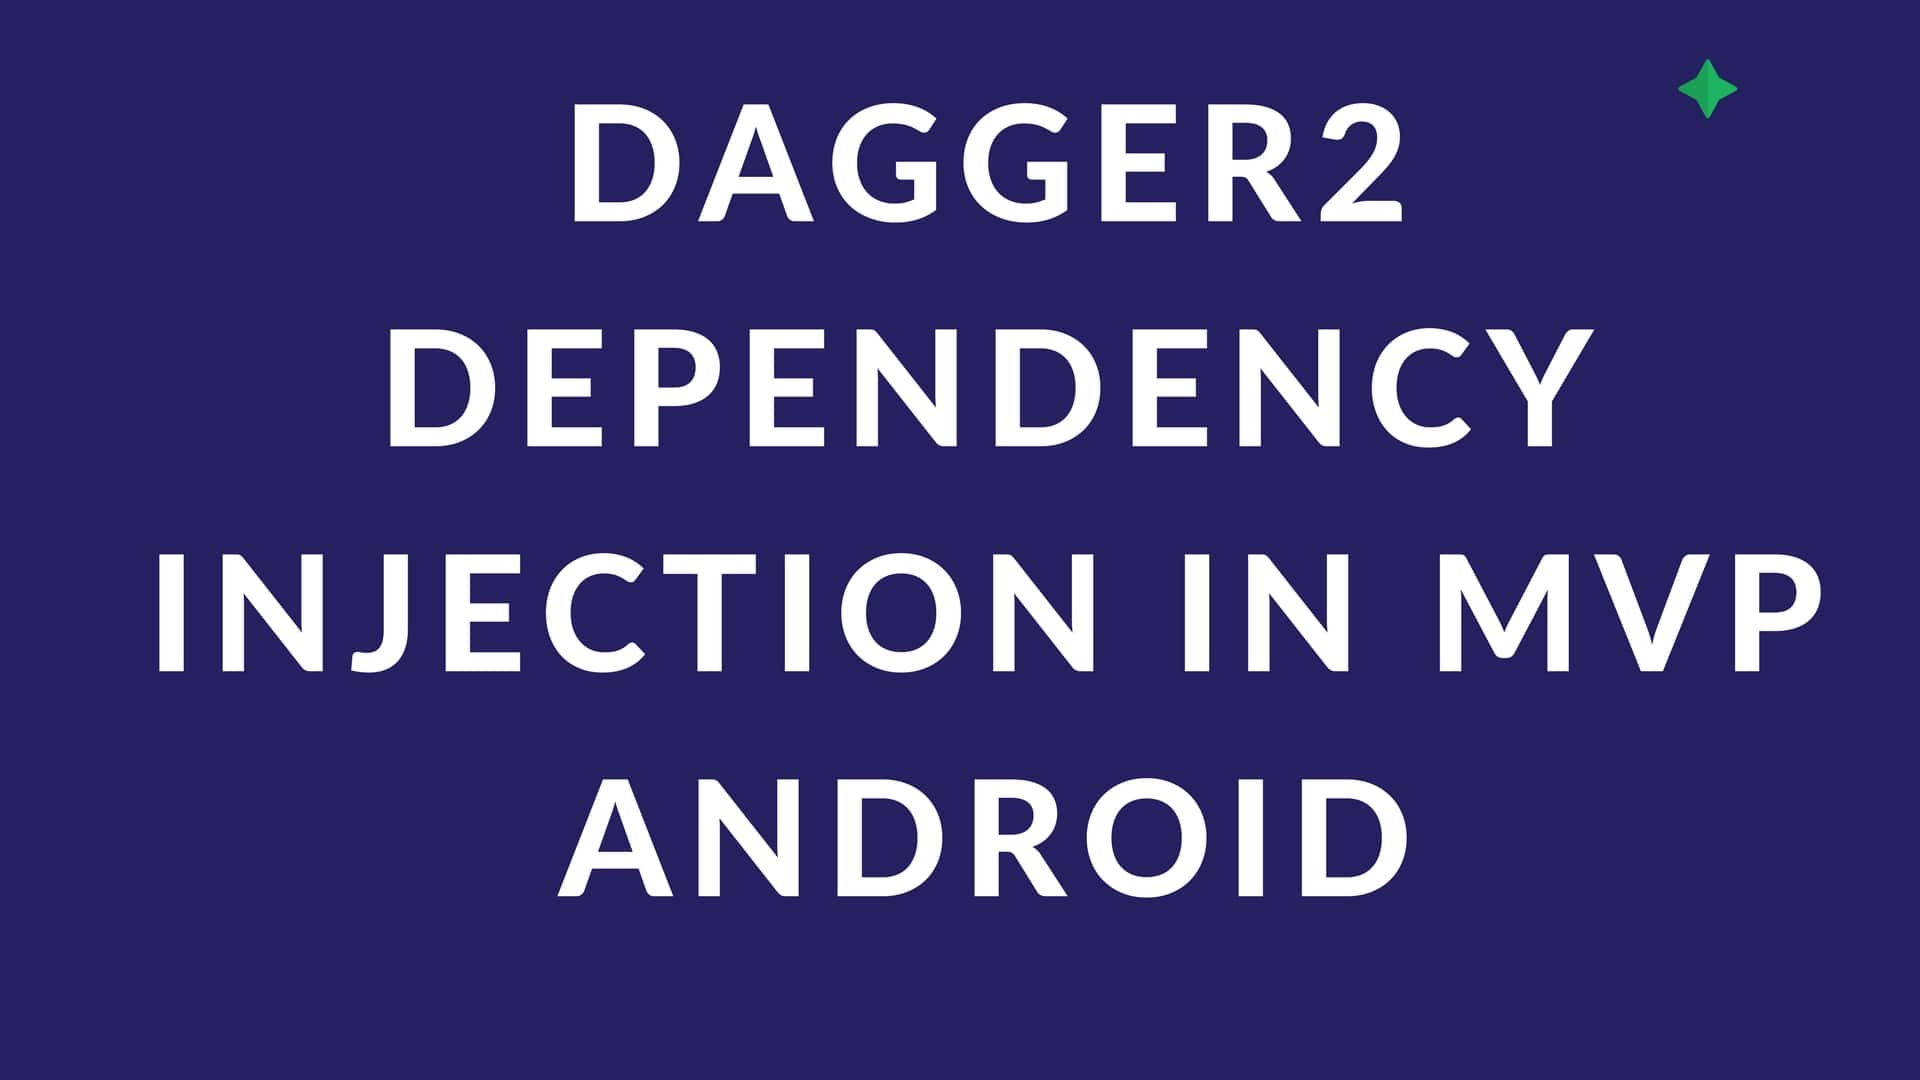 Dagger2 dependency injection in MVP android